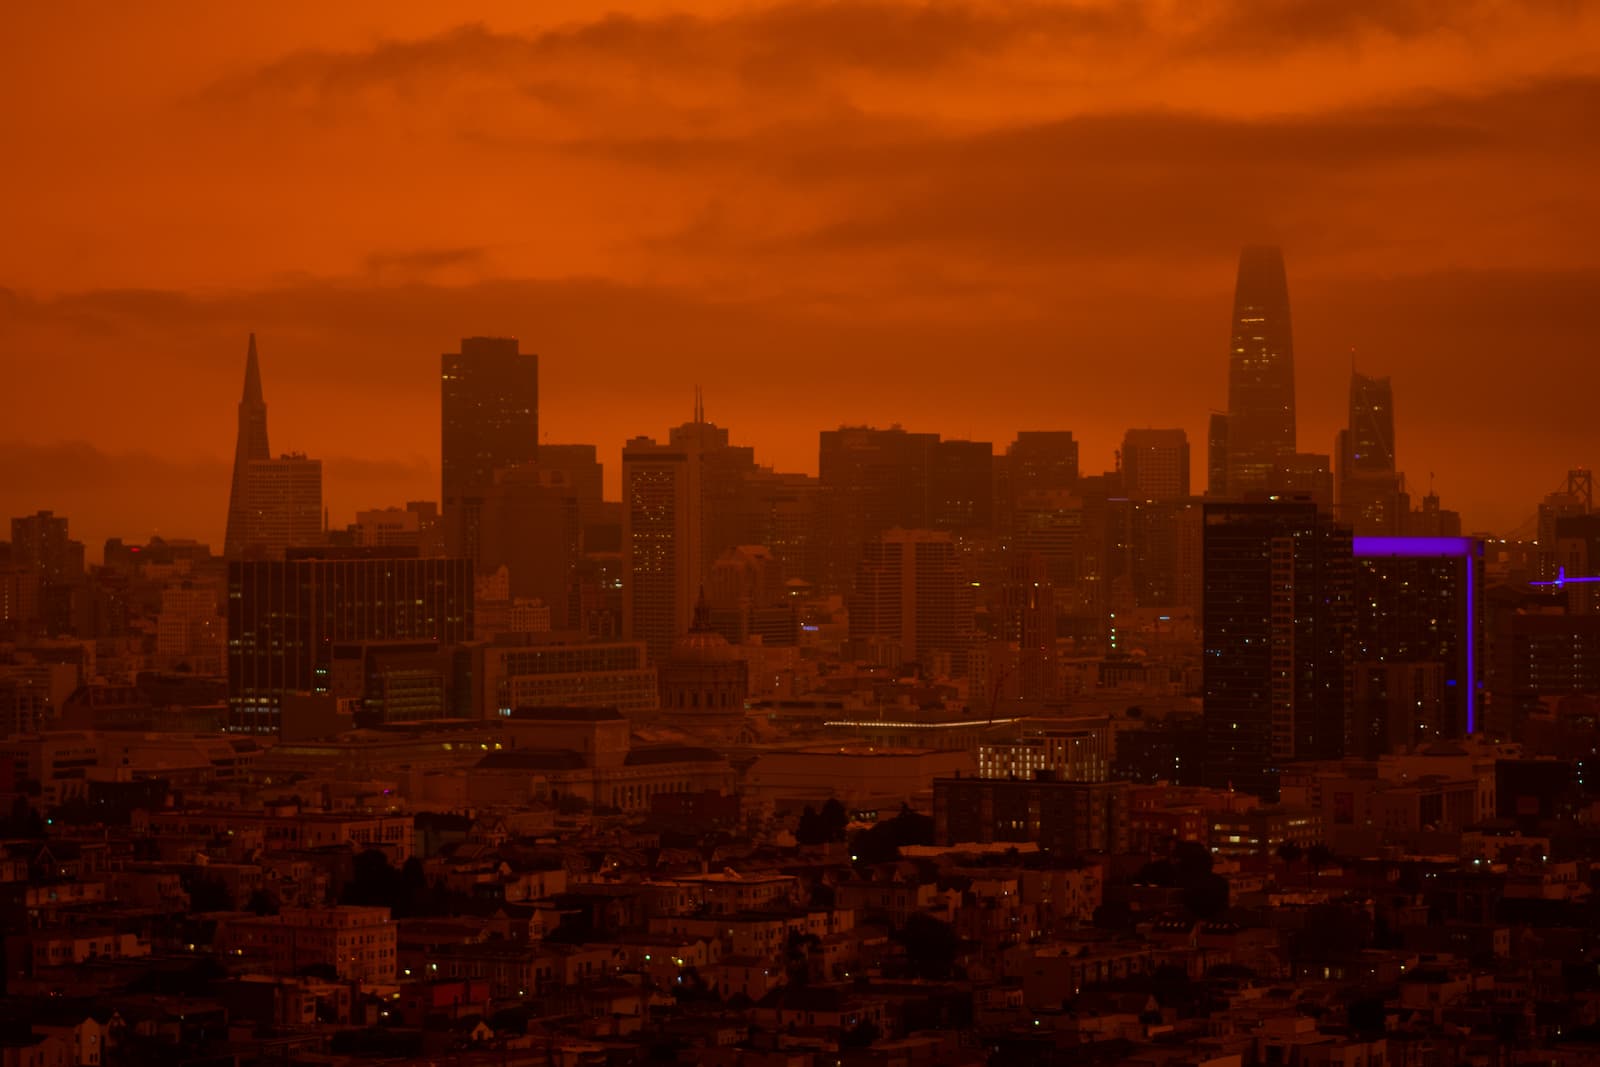 The San Francisco skyline. The entire city is dark orange, almost as if it were a photo taken on Mars.